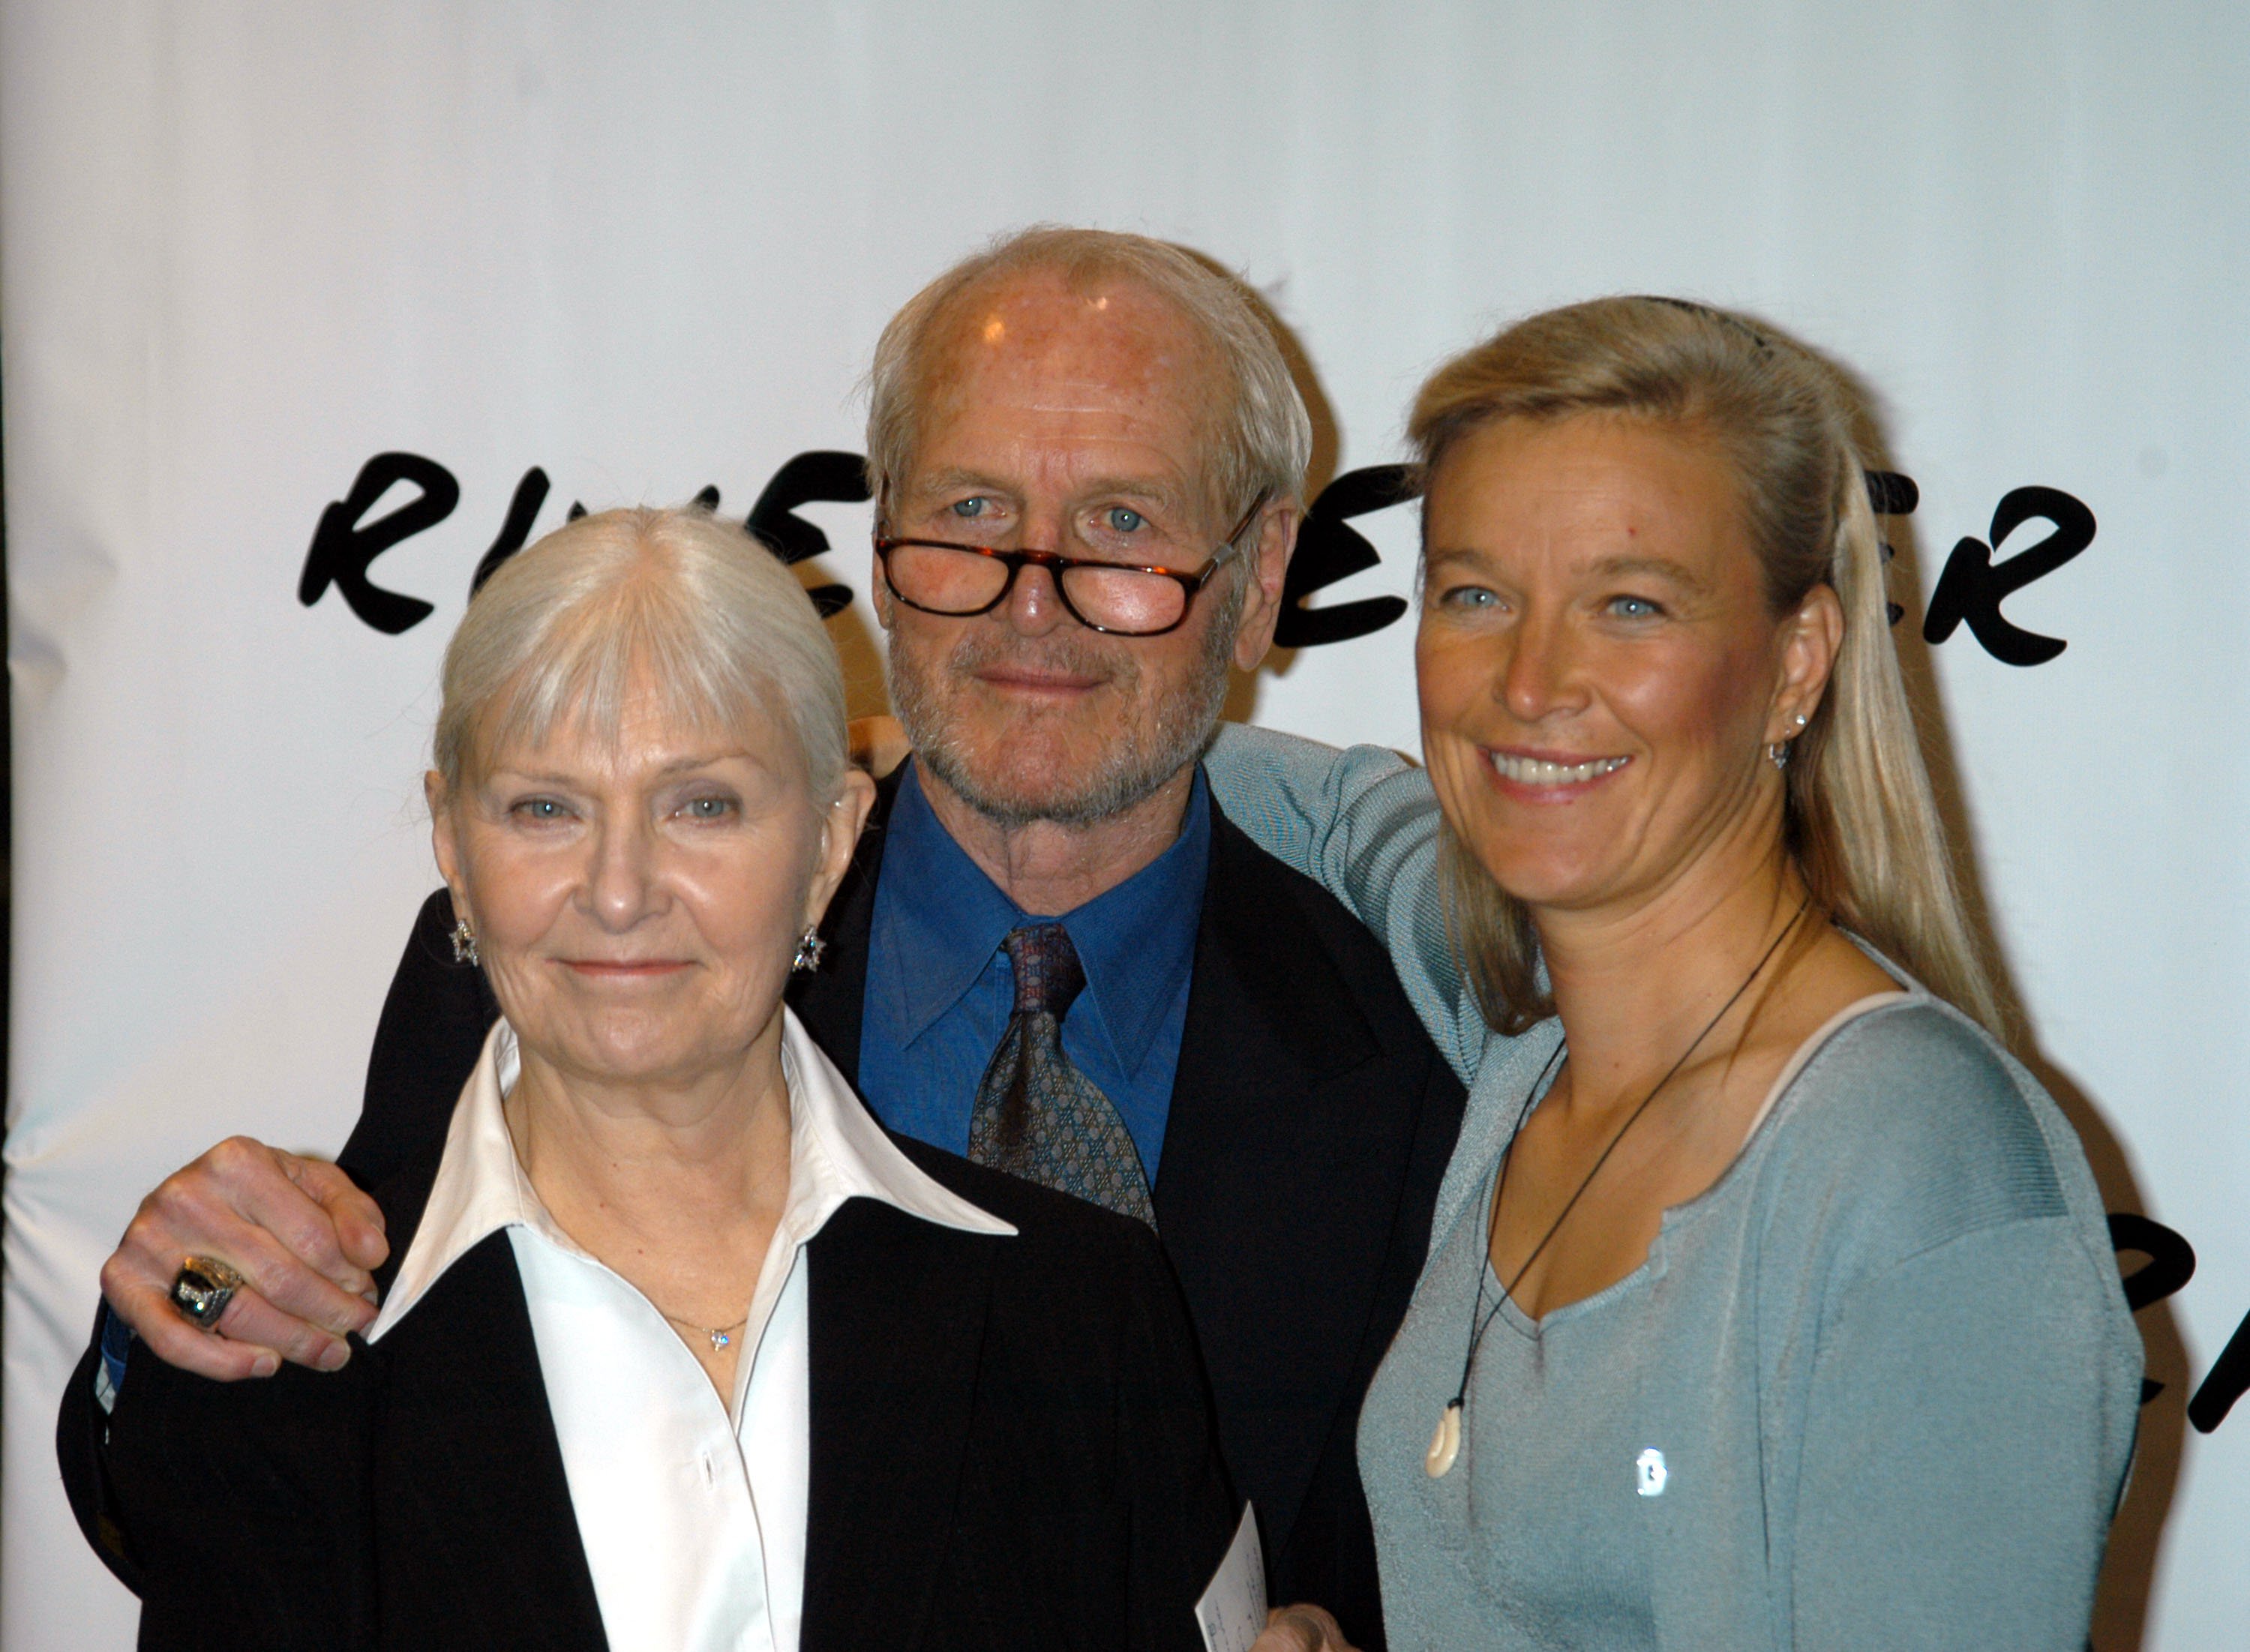 Paul Newman, Joanne Woodward, and their daughter Nell Newman at The Riverkeeper 2003 Benefit on May 16, 2003 | Source: Getty Images